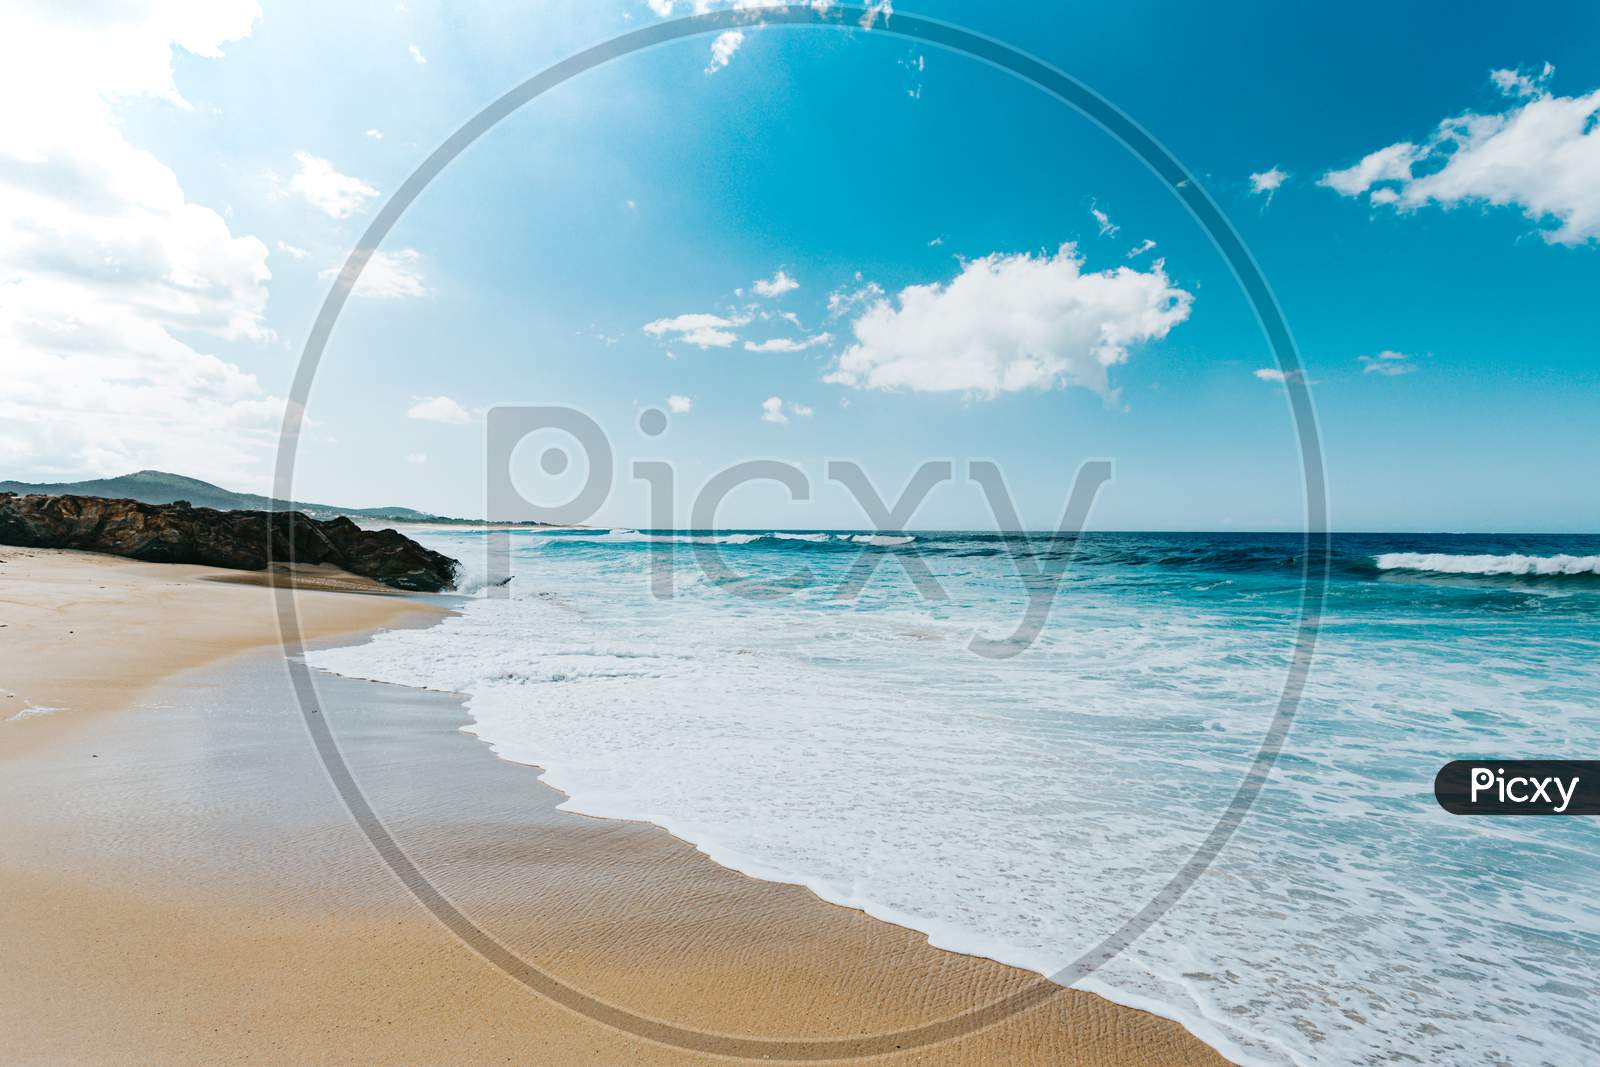 Massive Wild Beach With A Wave Of Sea Entering The Sand During A Sunny Day With A Super Bright Sky